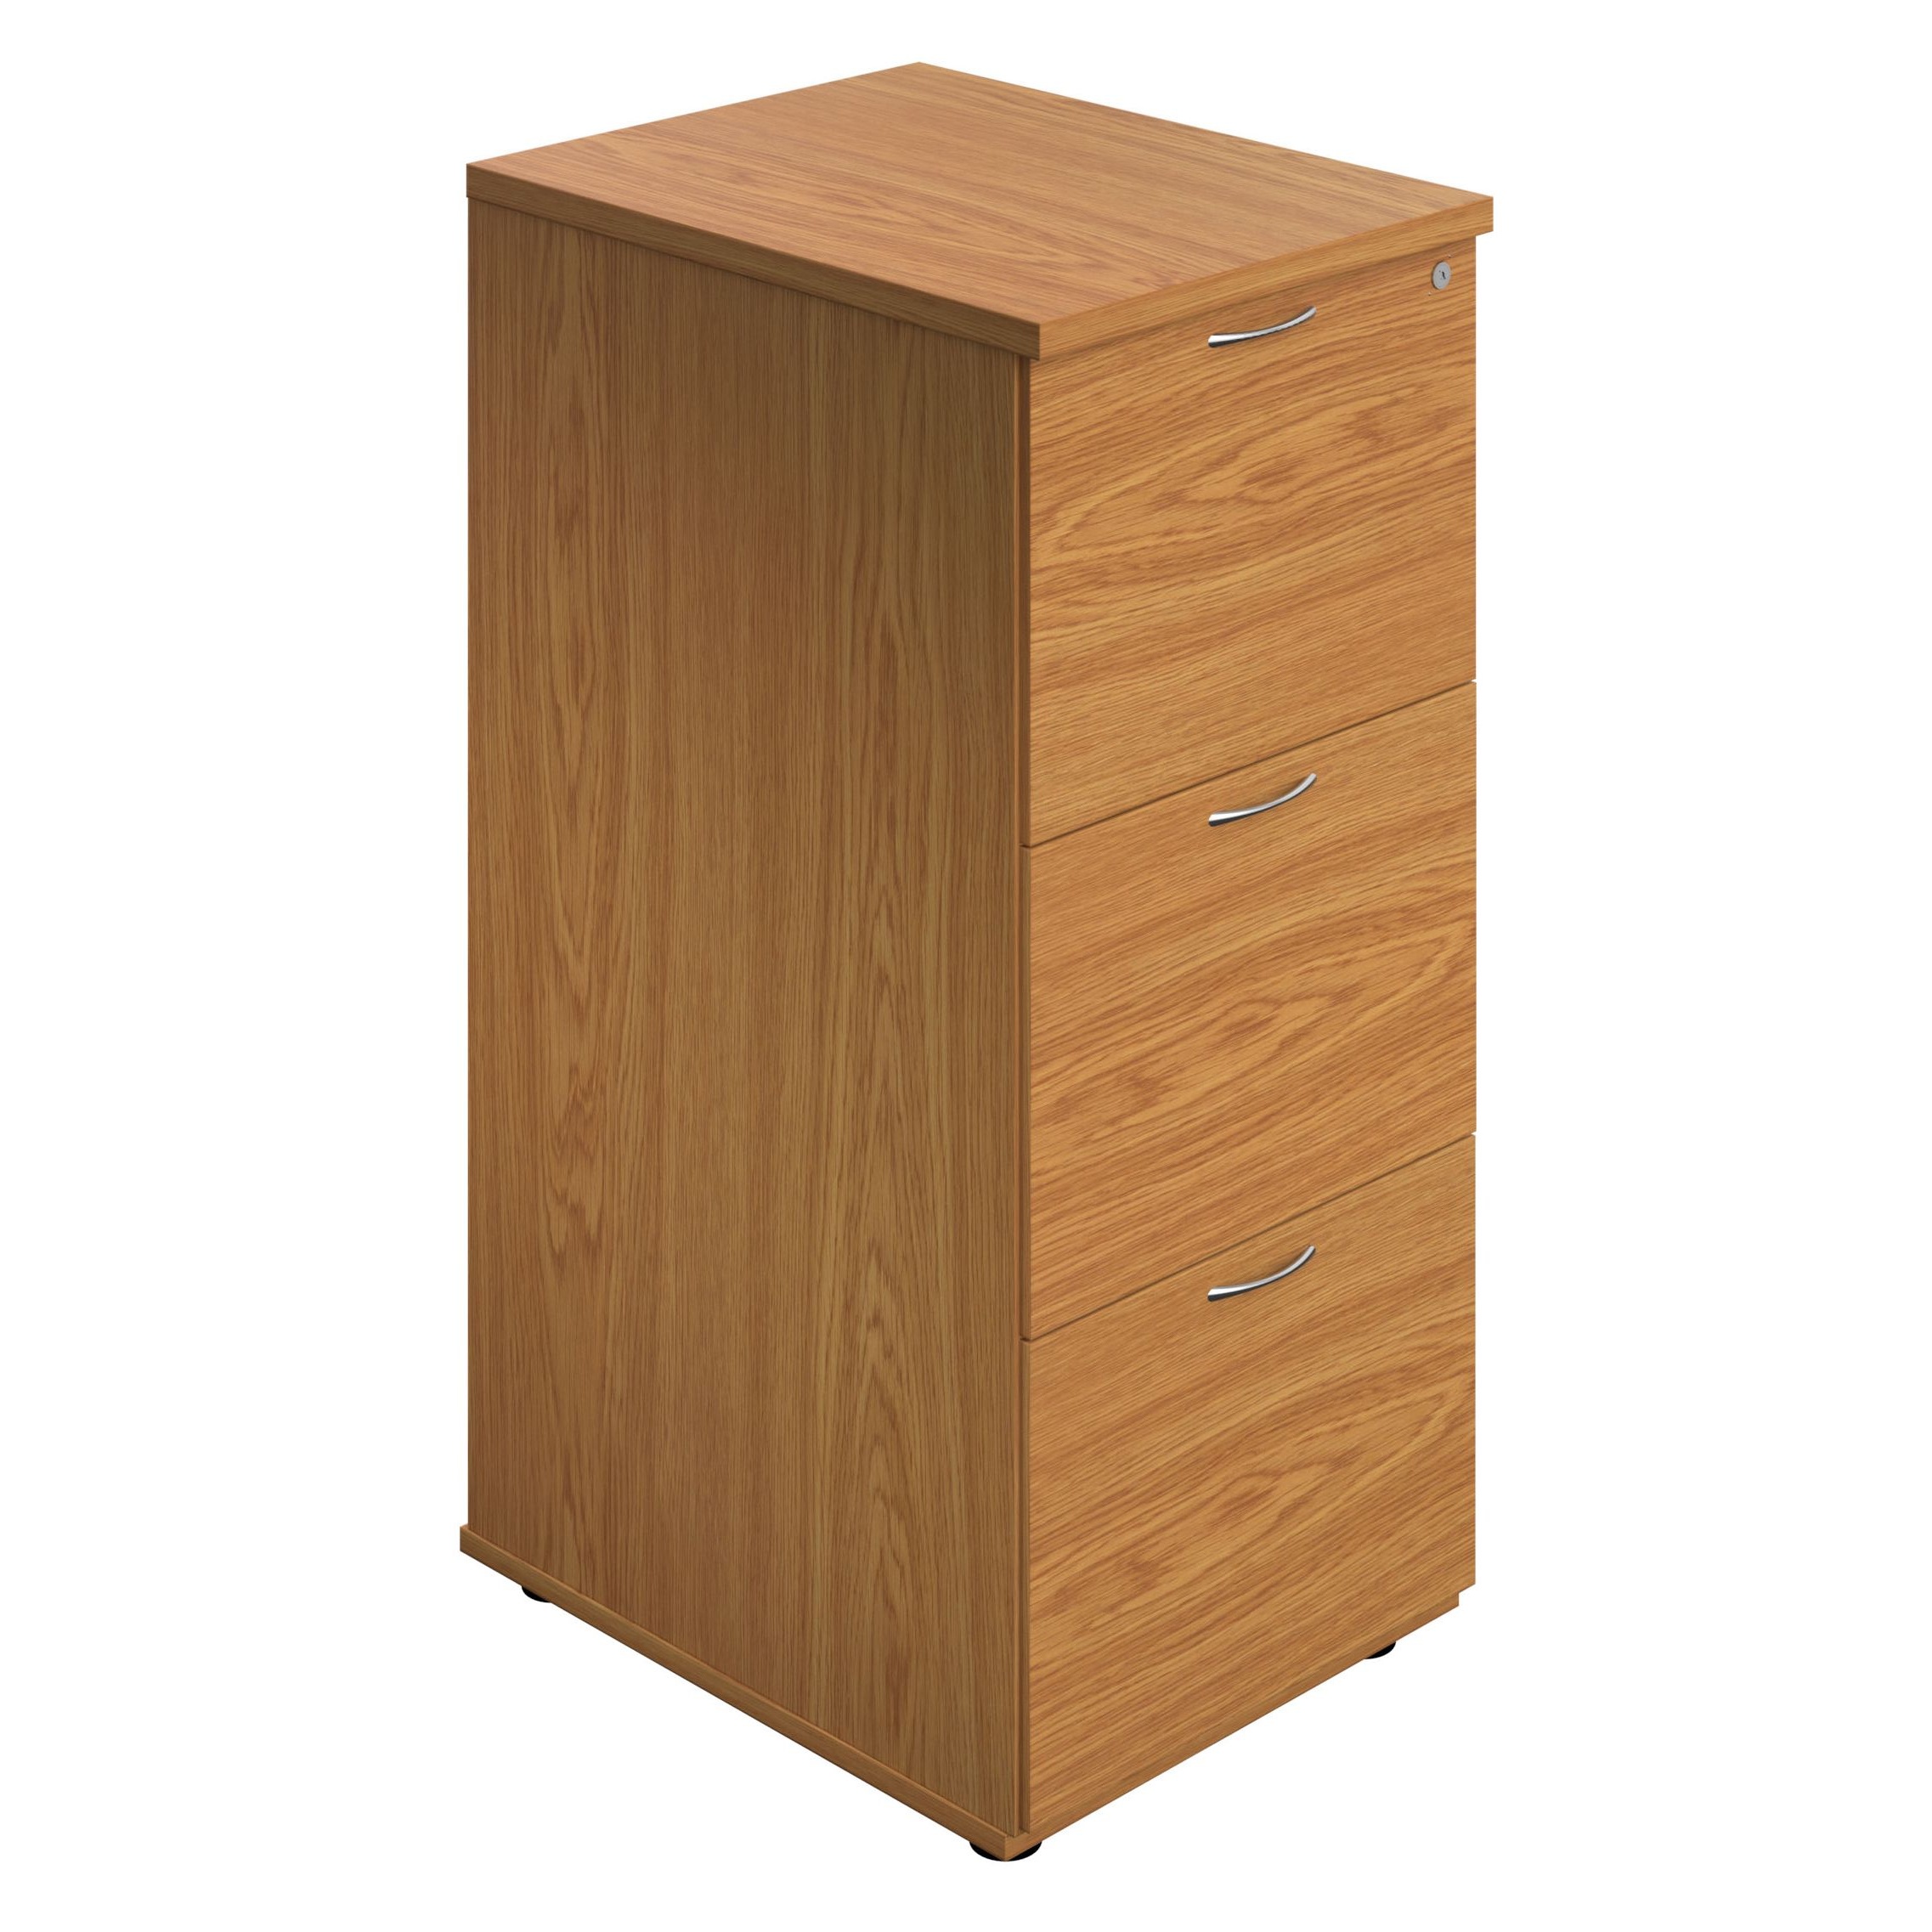 Office Essentials Wooden Filing Cabinets From Our Filing Cabinets Range